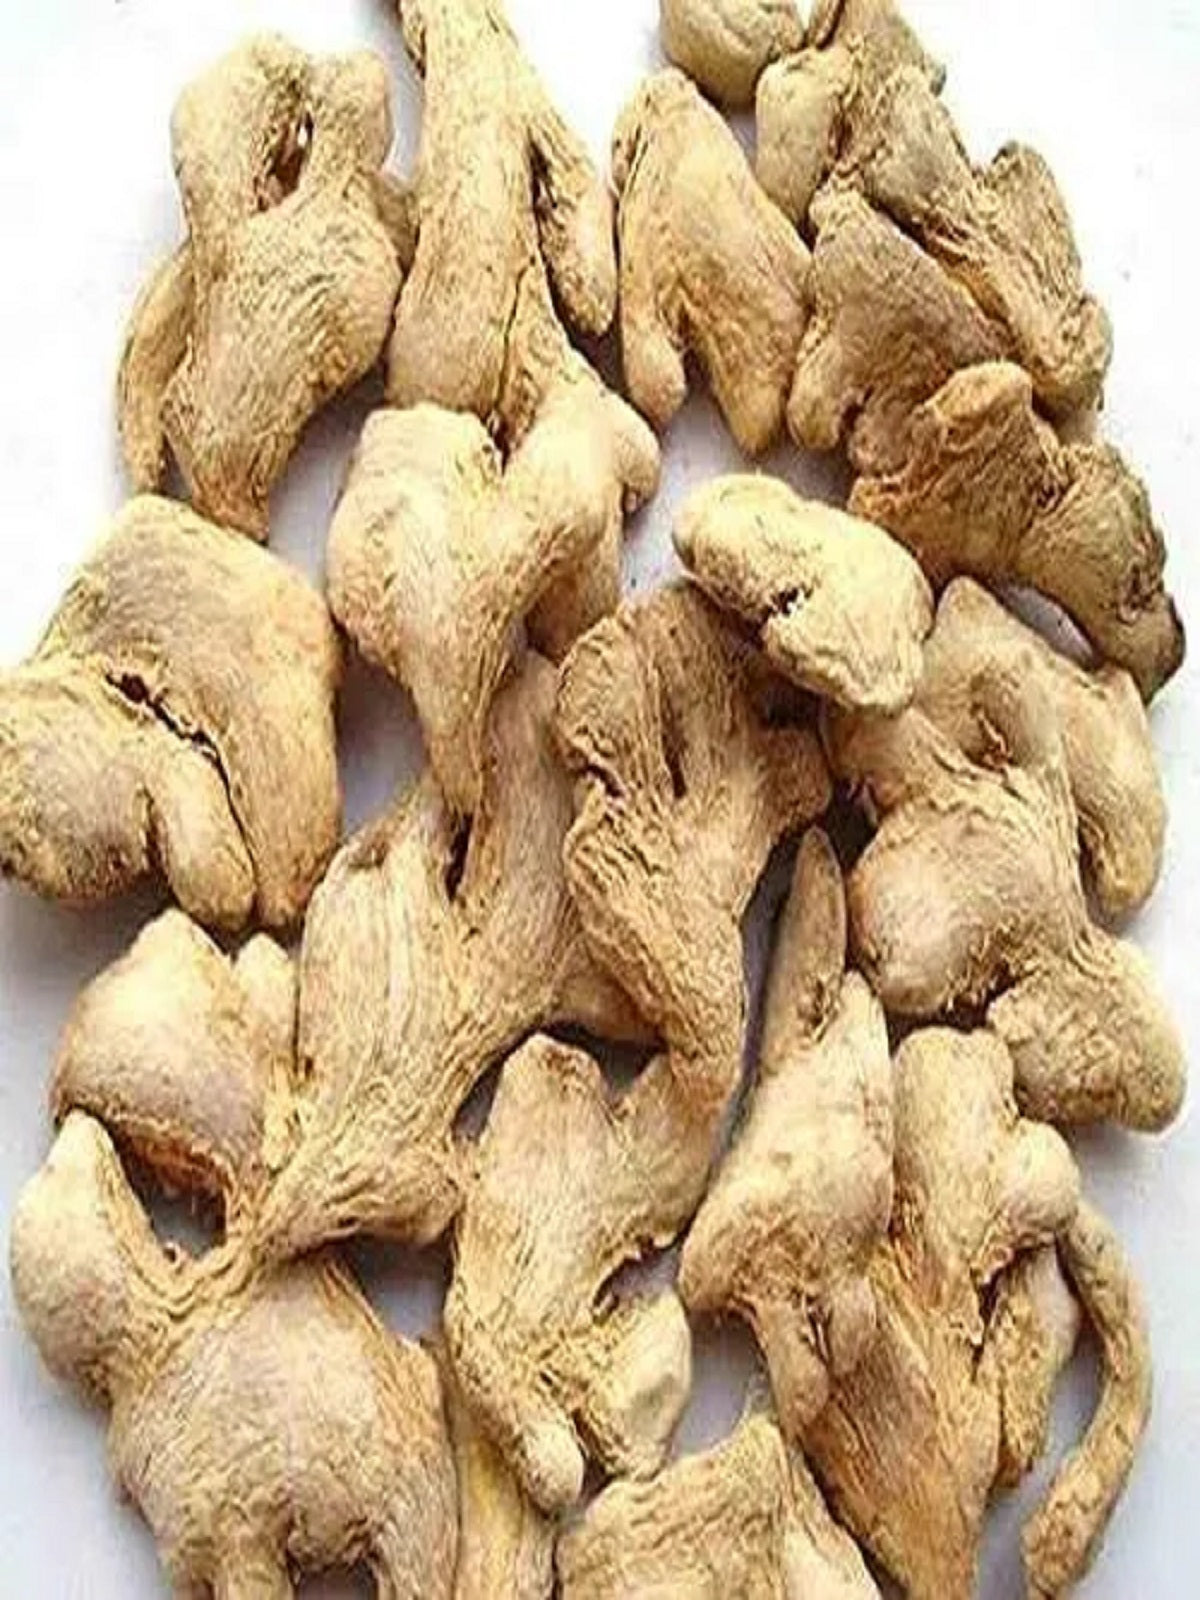 Buy the best quality Sauth dry ginger online at Farmonics